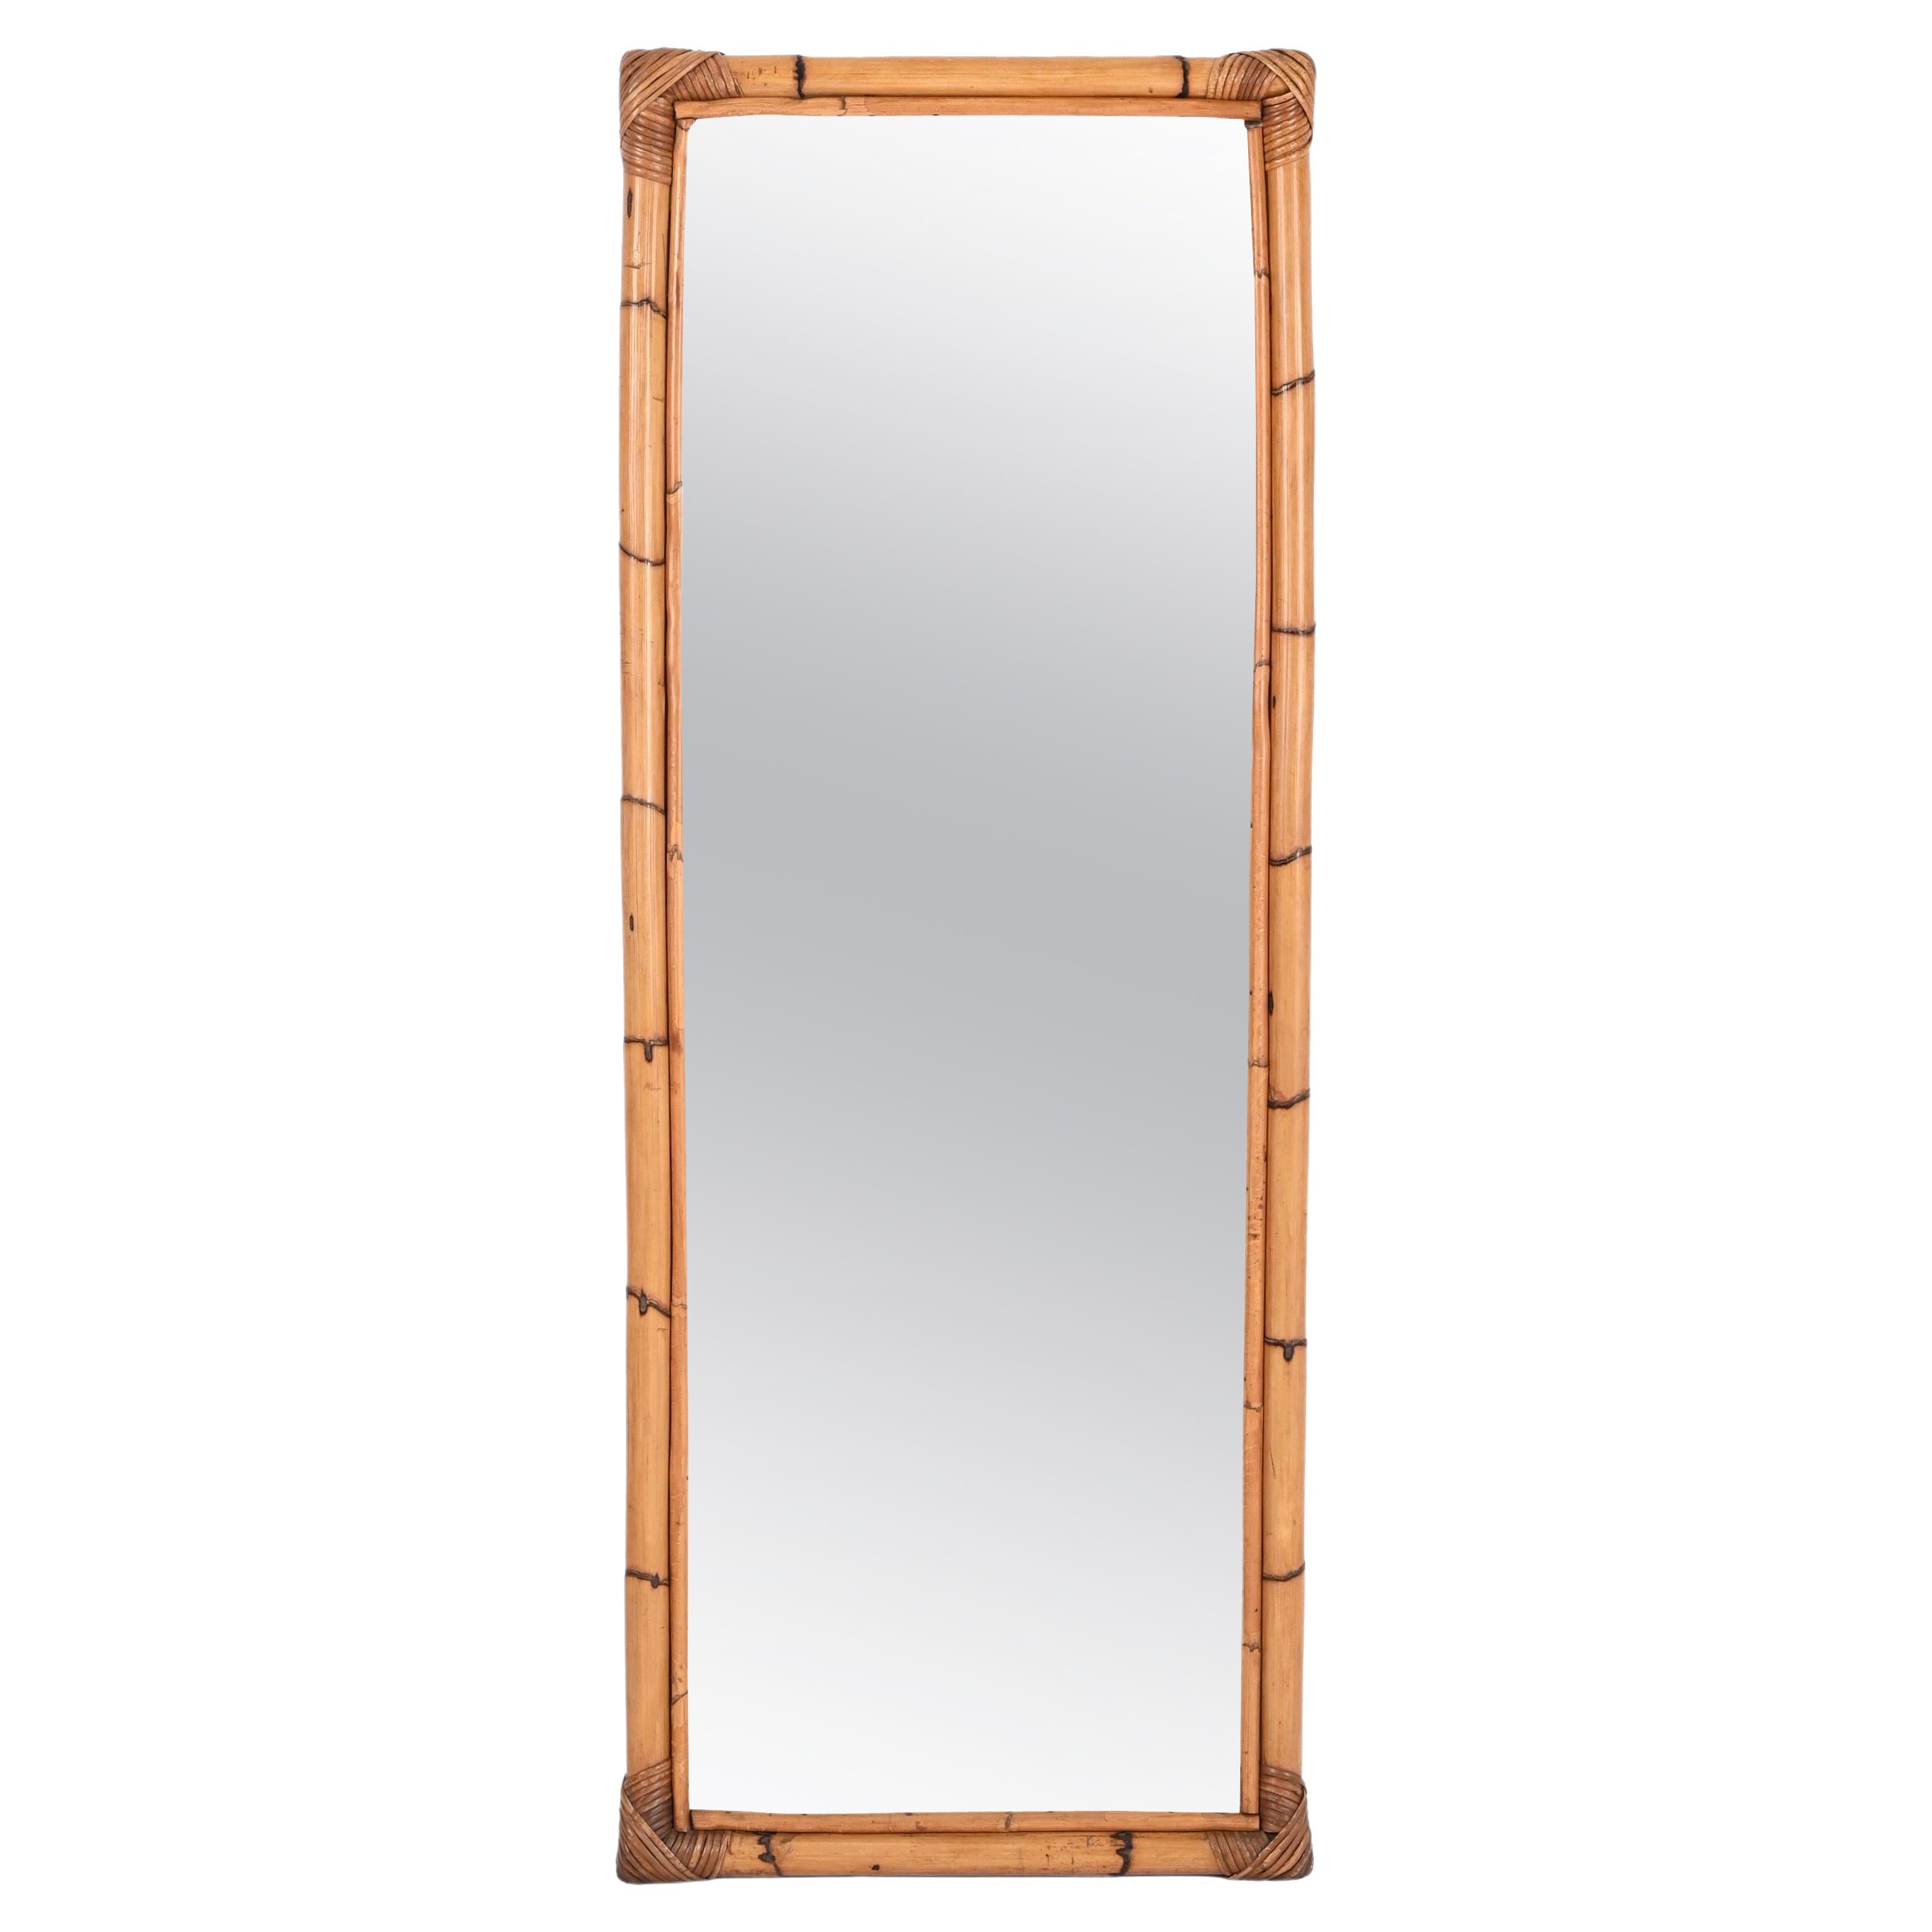 Midcentury Rectangular Mirror with Bamboo and Rattan Frame, Italy 1970s